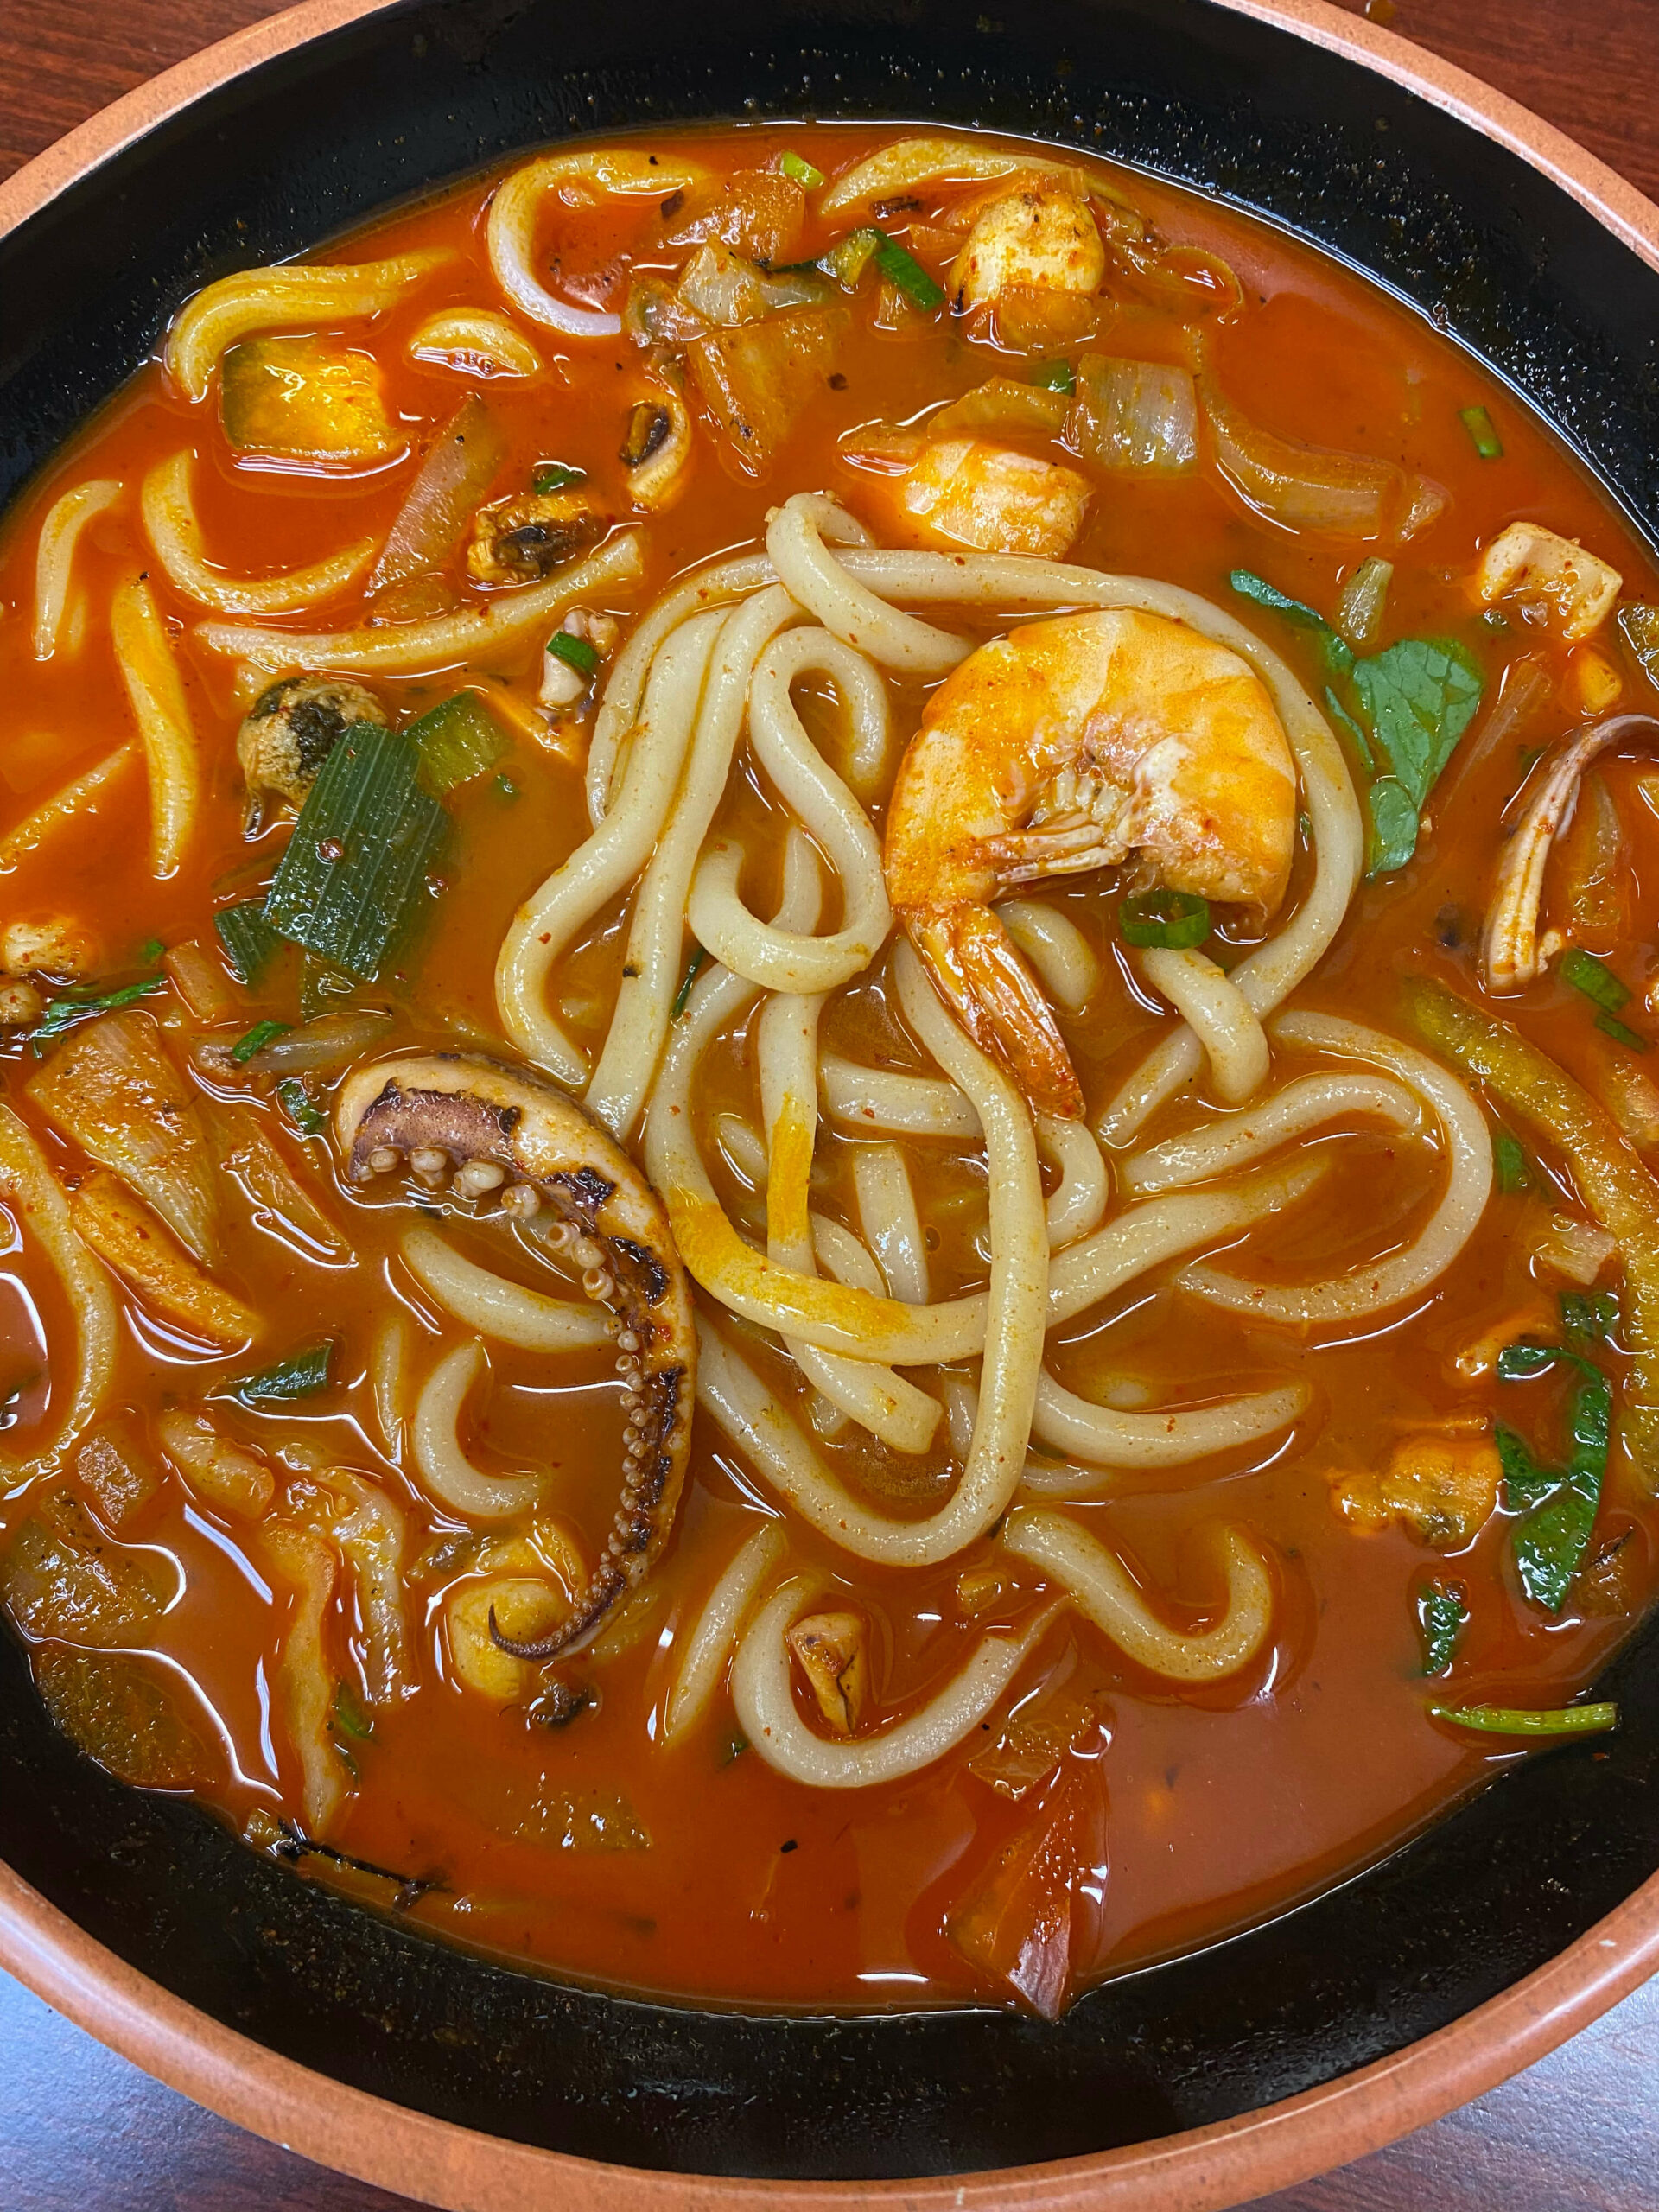 Kimchi Mama’s bowl of Korean spicy seafood noodle soup.